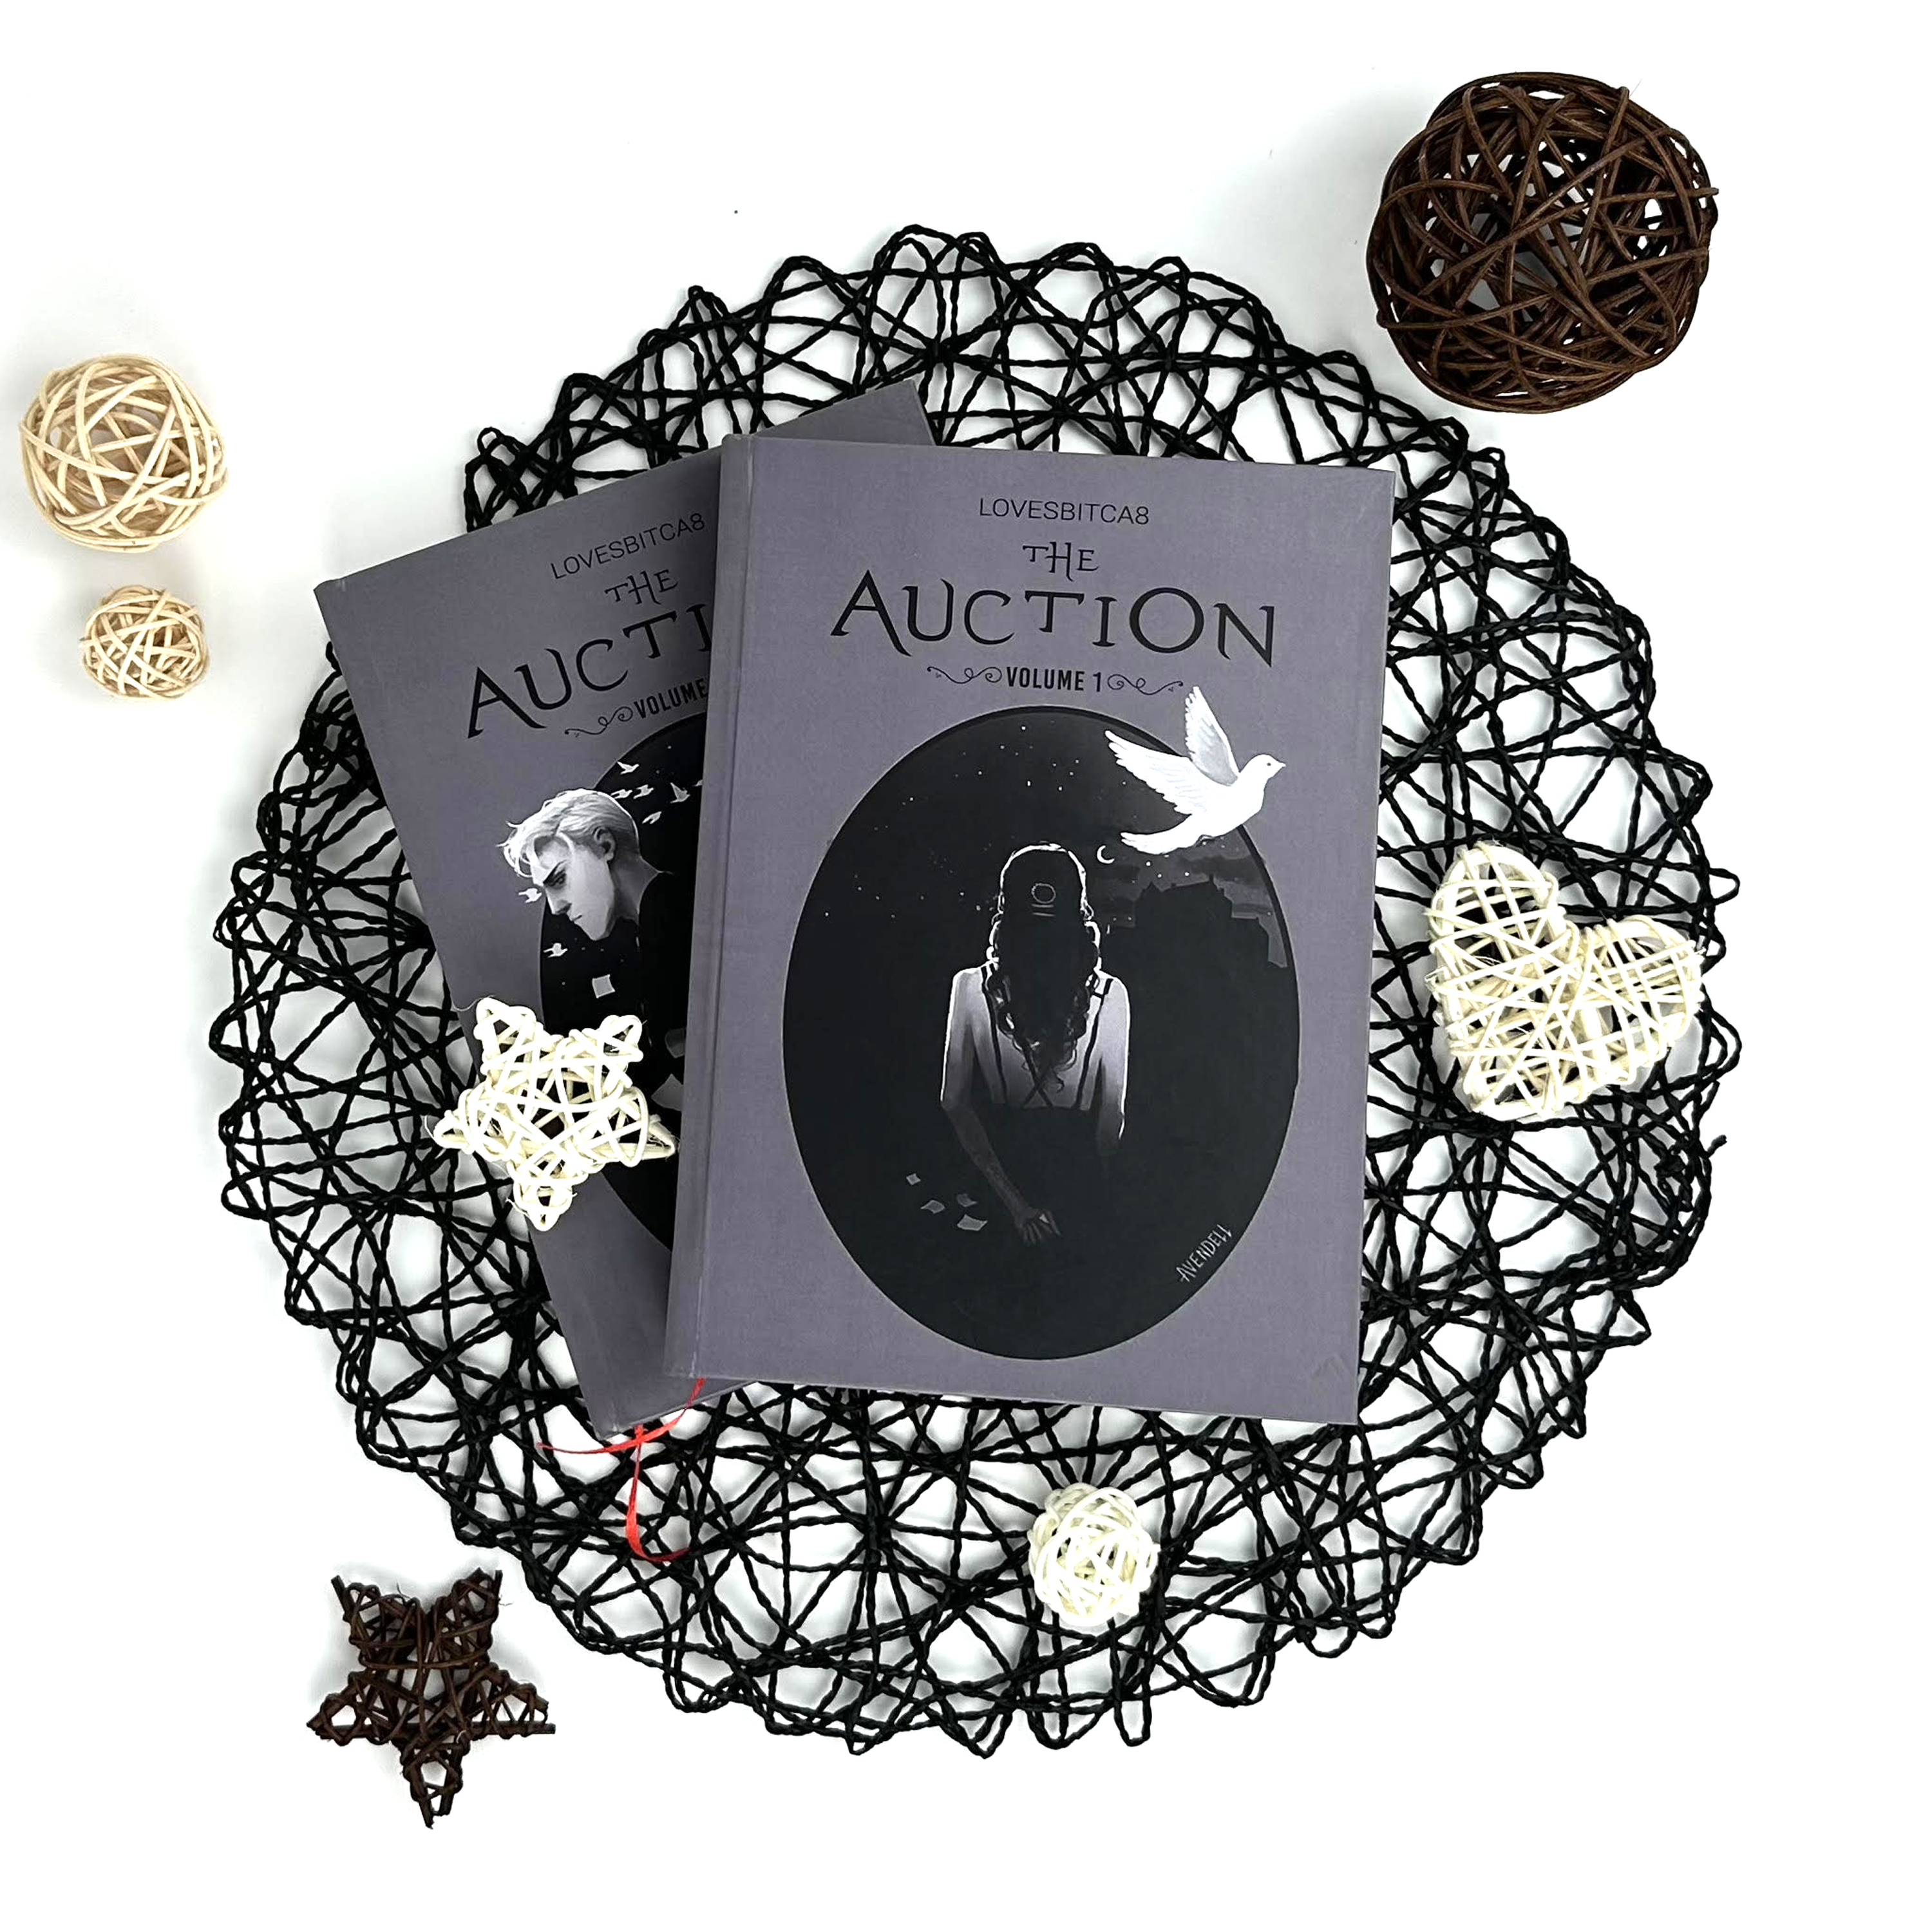 The Auction Book | Full 2 Volumes, Hard Cover (Rights and Wrong, #3). Dramione Fanfic. Exclusive Poster Gift Set Included